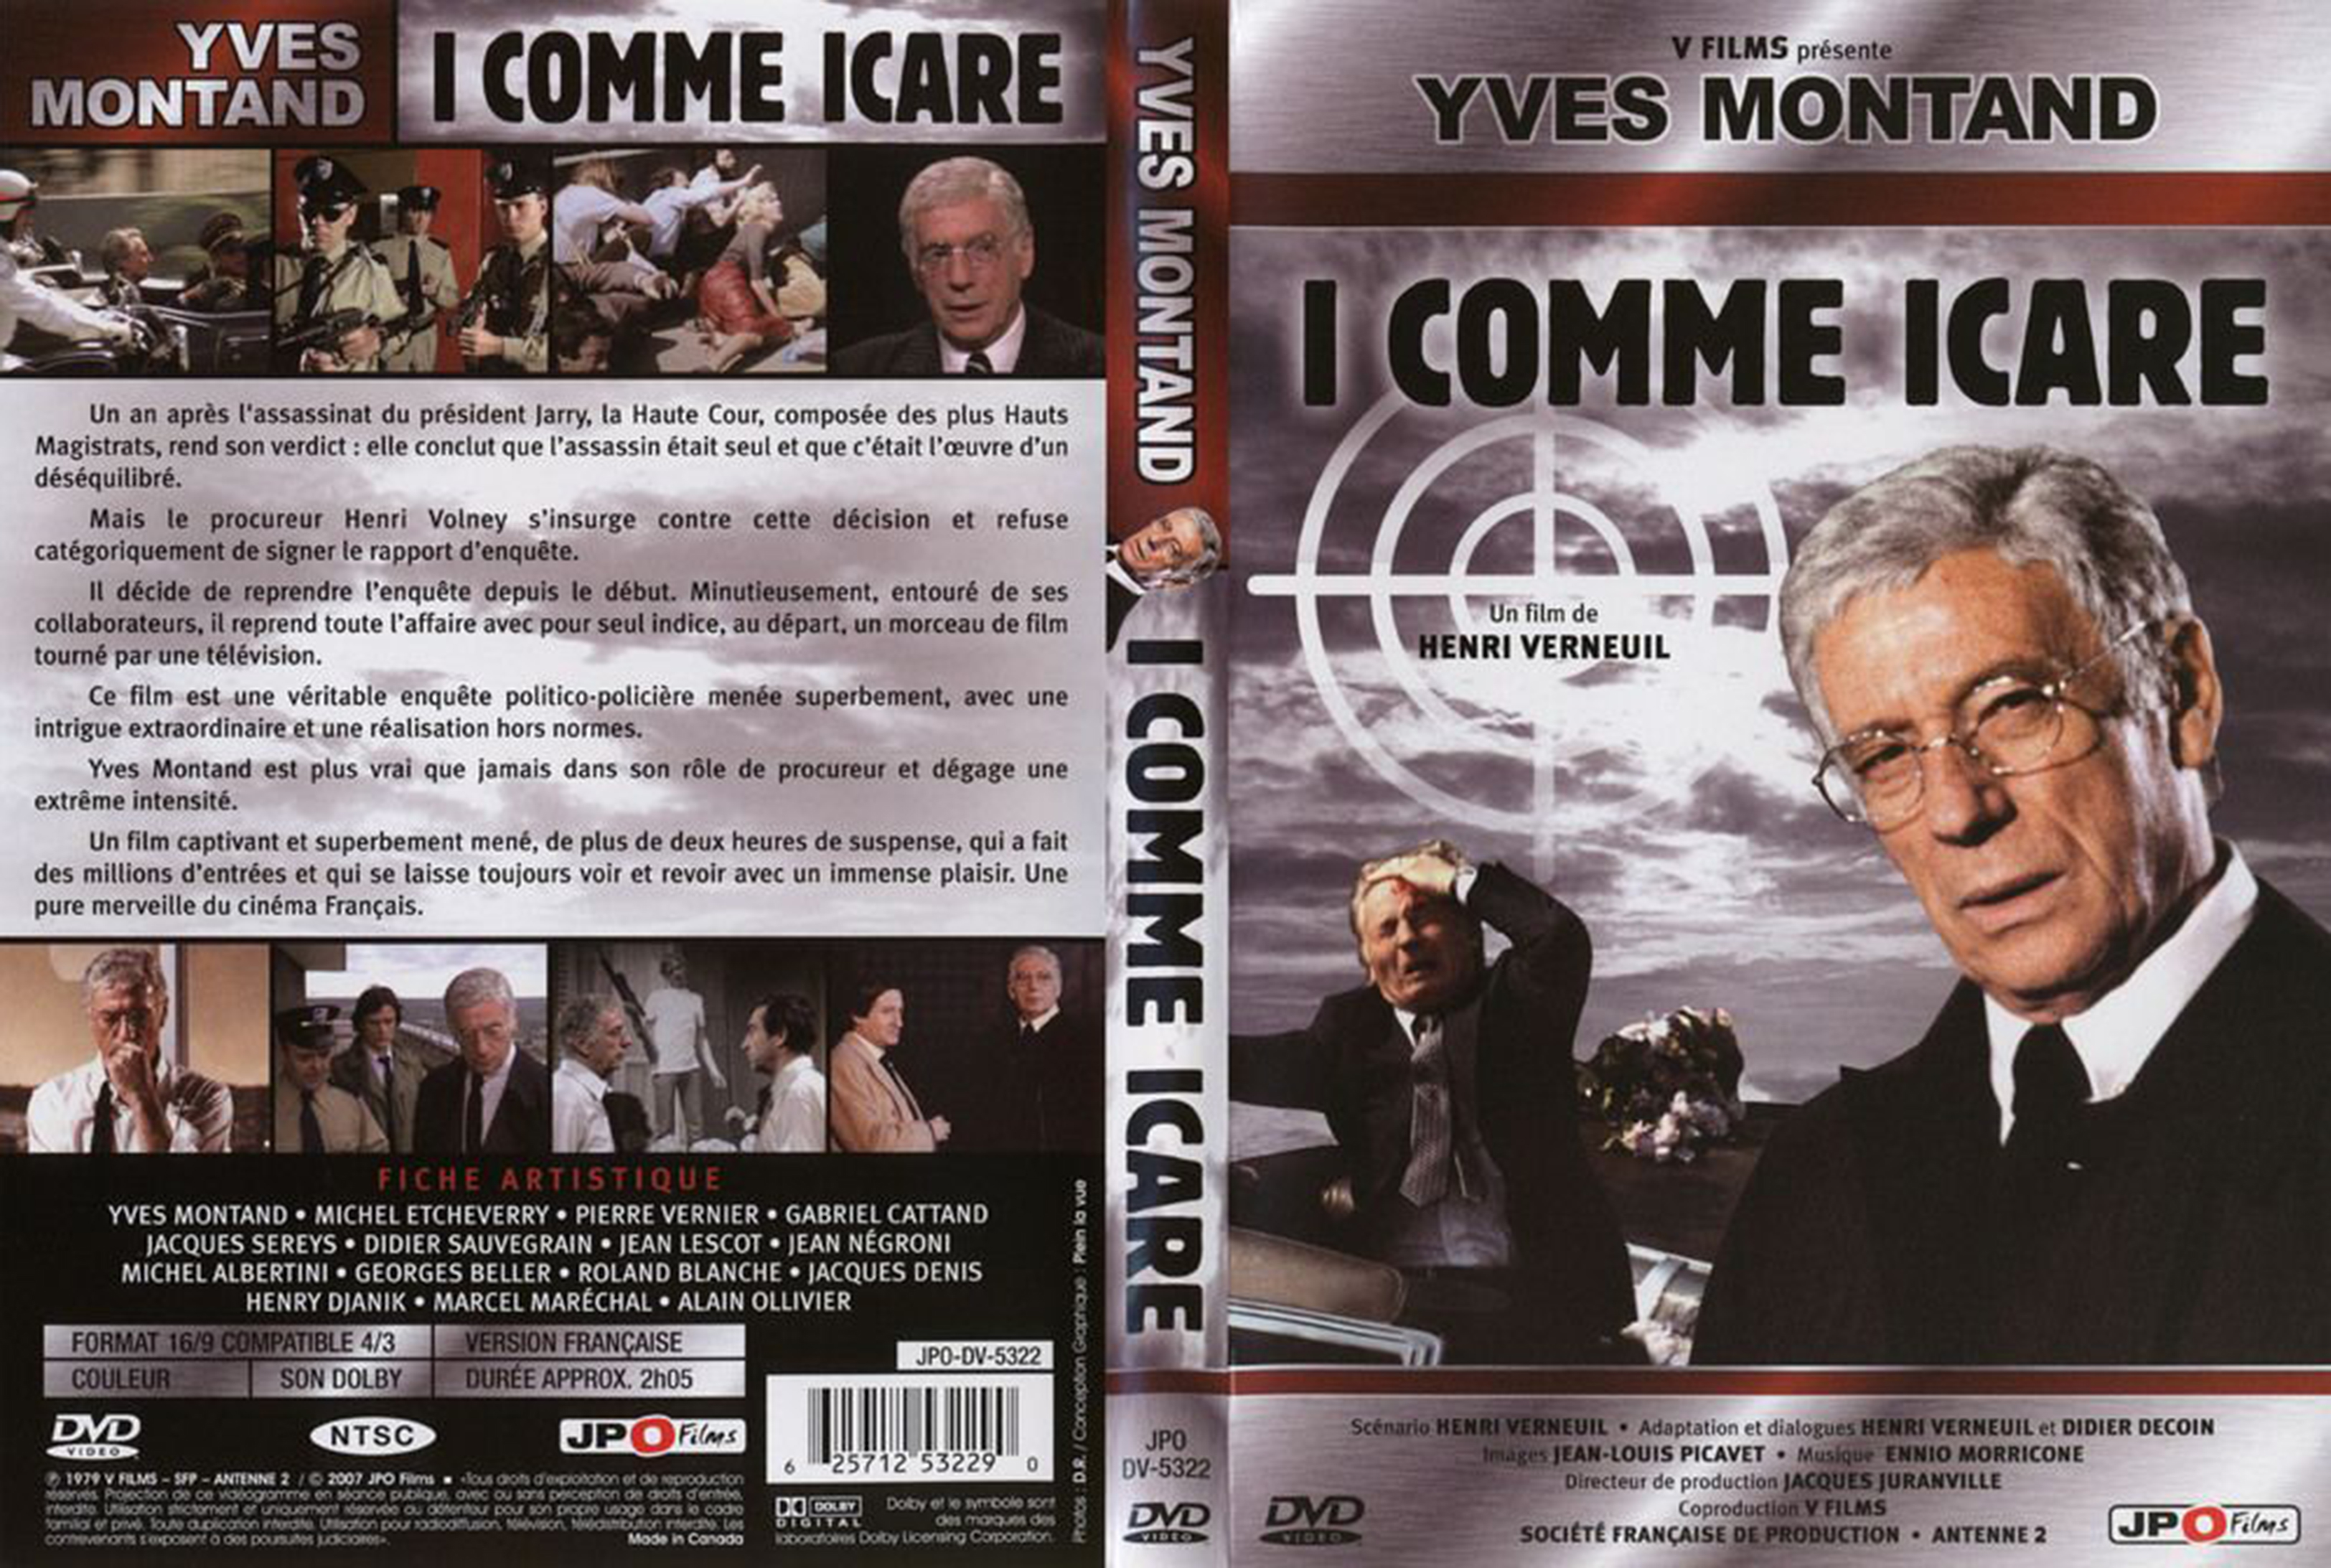 Jaquette DVD I comme icare